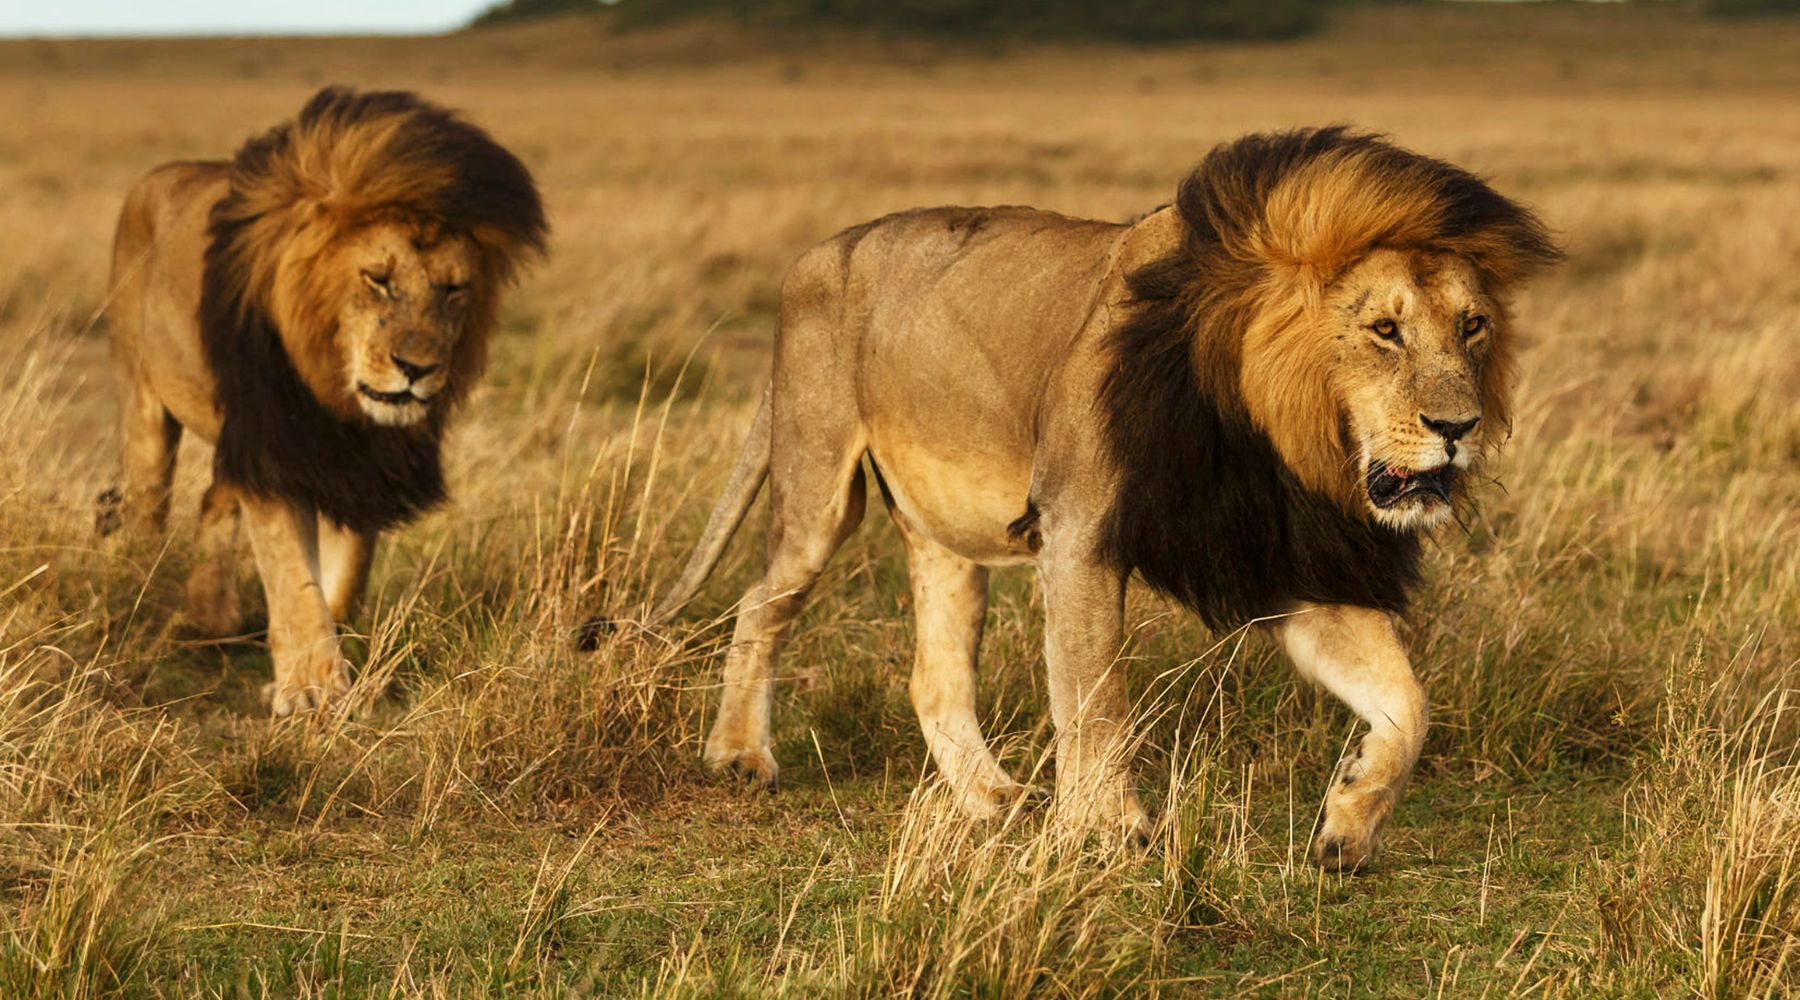 Wonders of Wildlife - Interesting Facts about Lions - FOREVER WILDLIFE